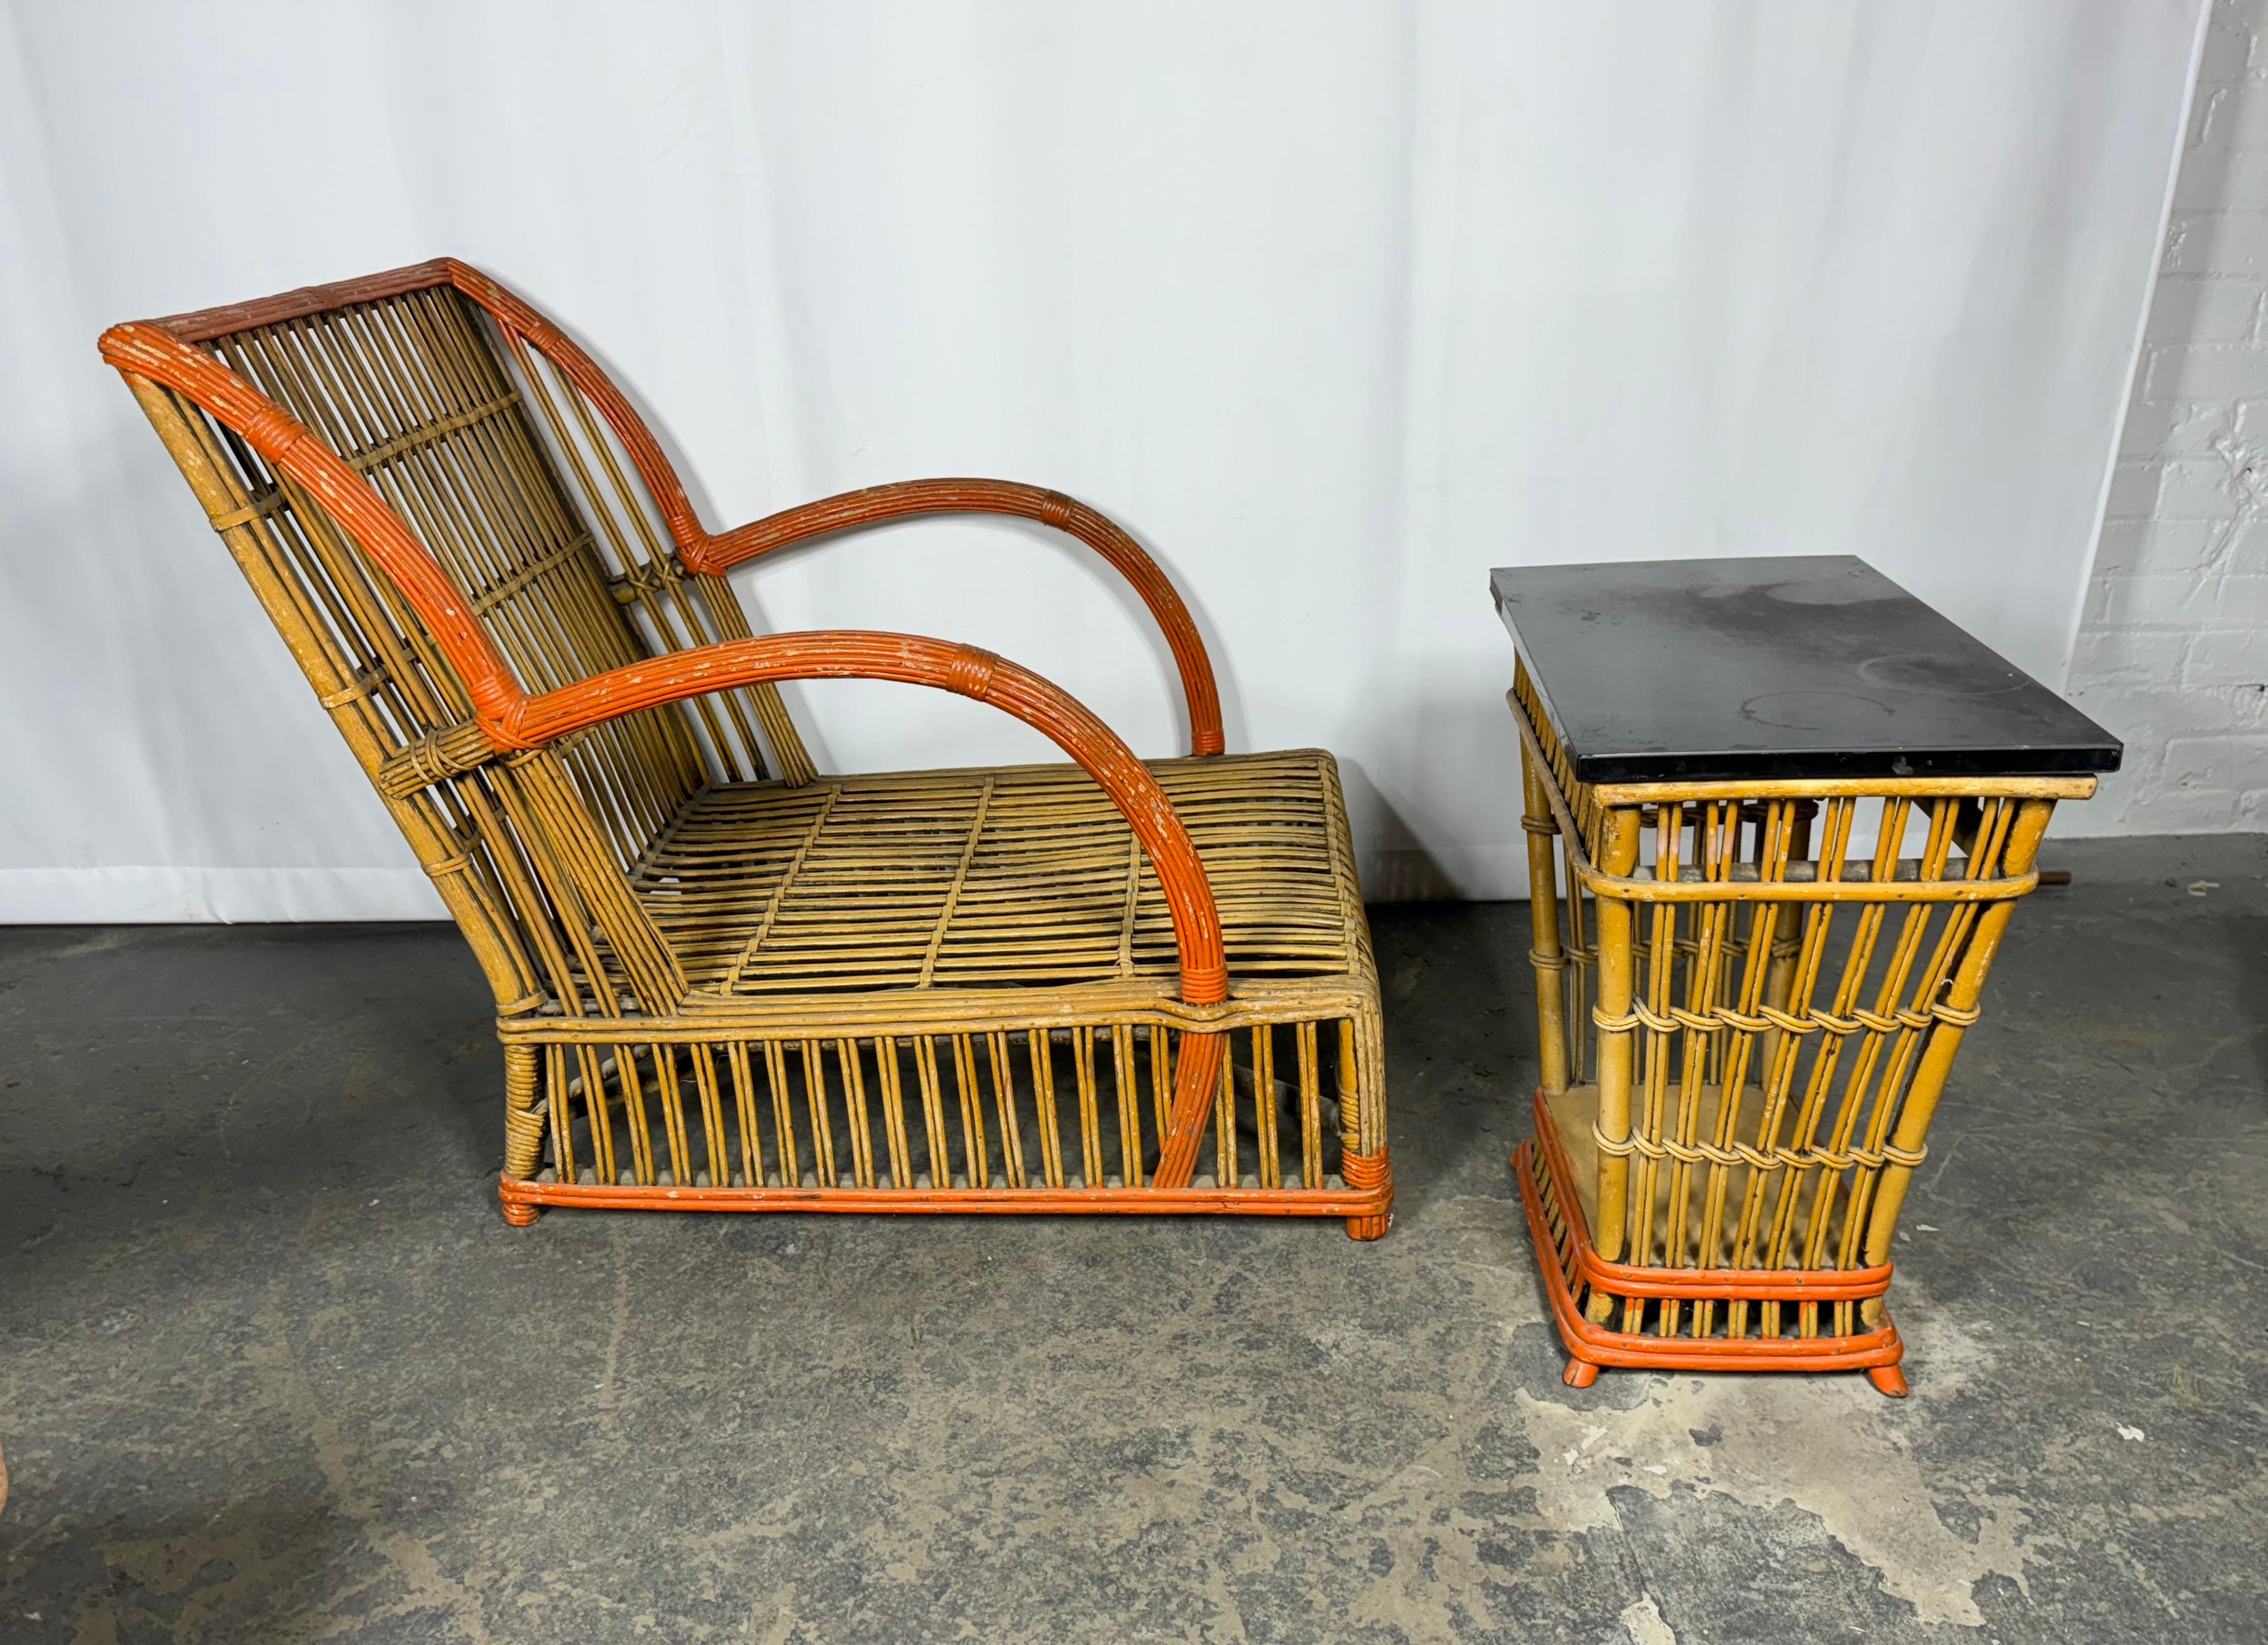 Stunning 1930's Art Stick Wicker /Split Reed Lounge Chair and End Table. attrib to  Ypsilanti Reed Furniture Co... Superior quality and construction,, Amazing design,Nice original condition.  Great color / patina. Set may have been re-painted at